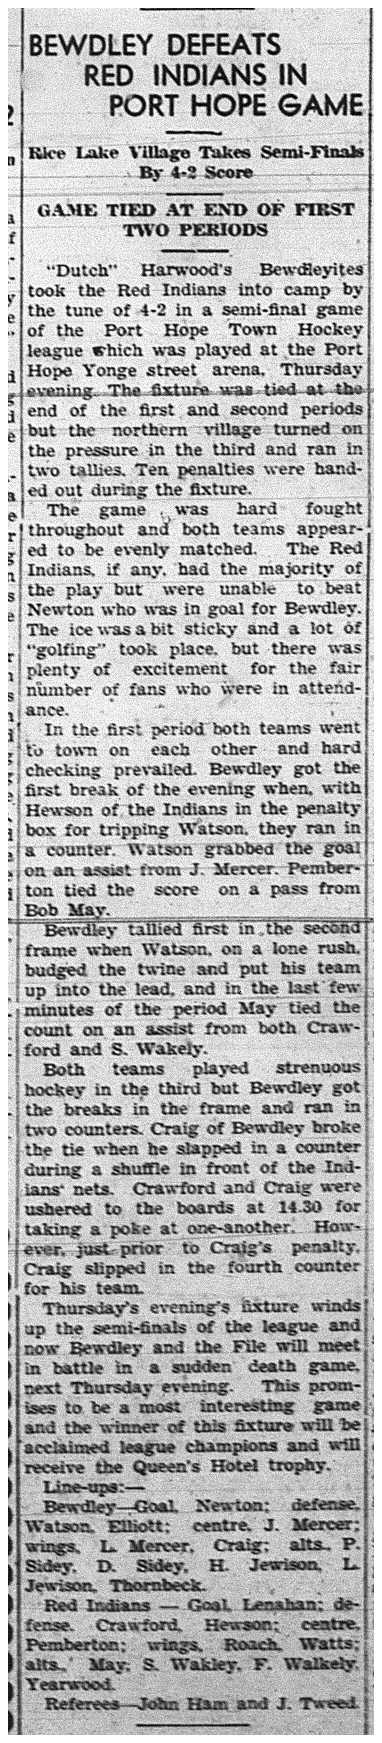 1939-03-09 Hockey -PH Town League Bewdley vs Red Indians